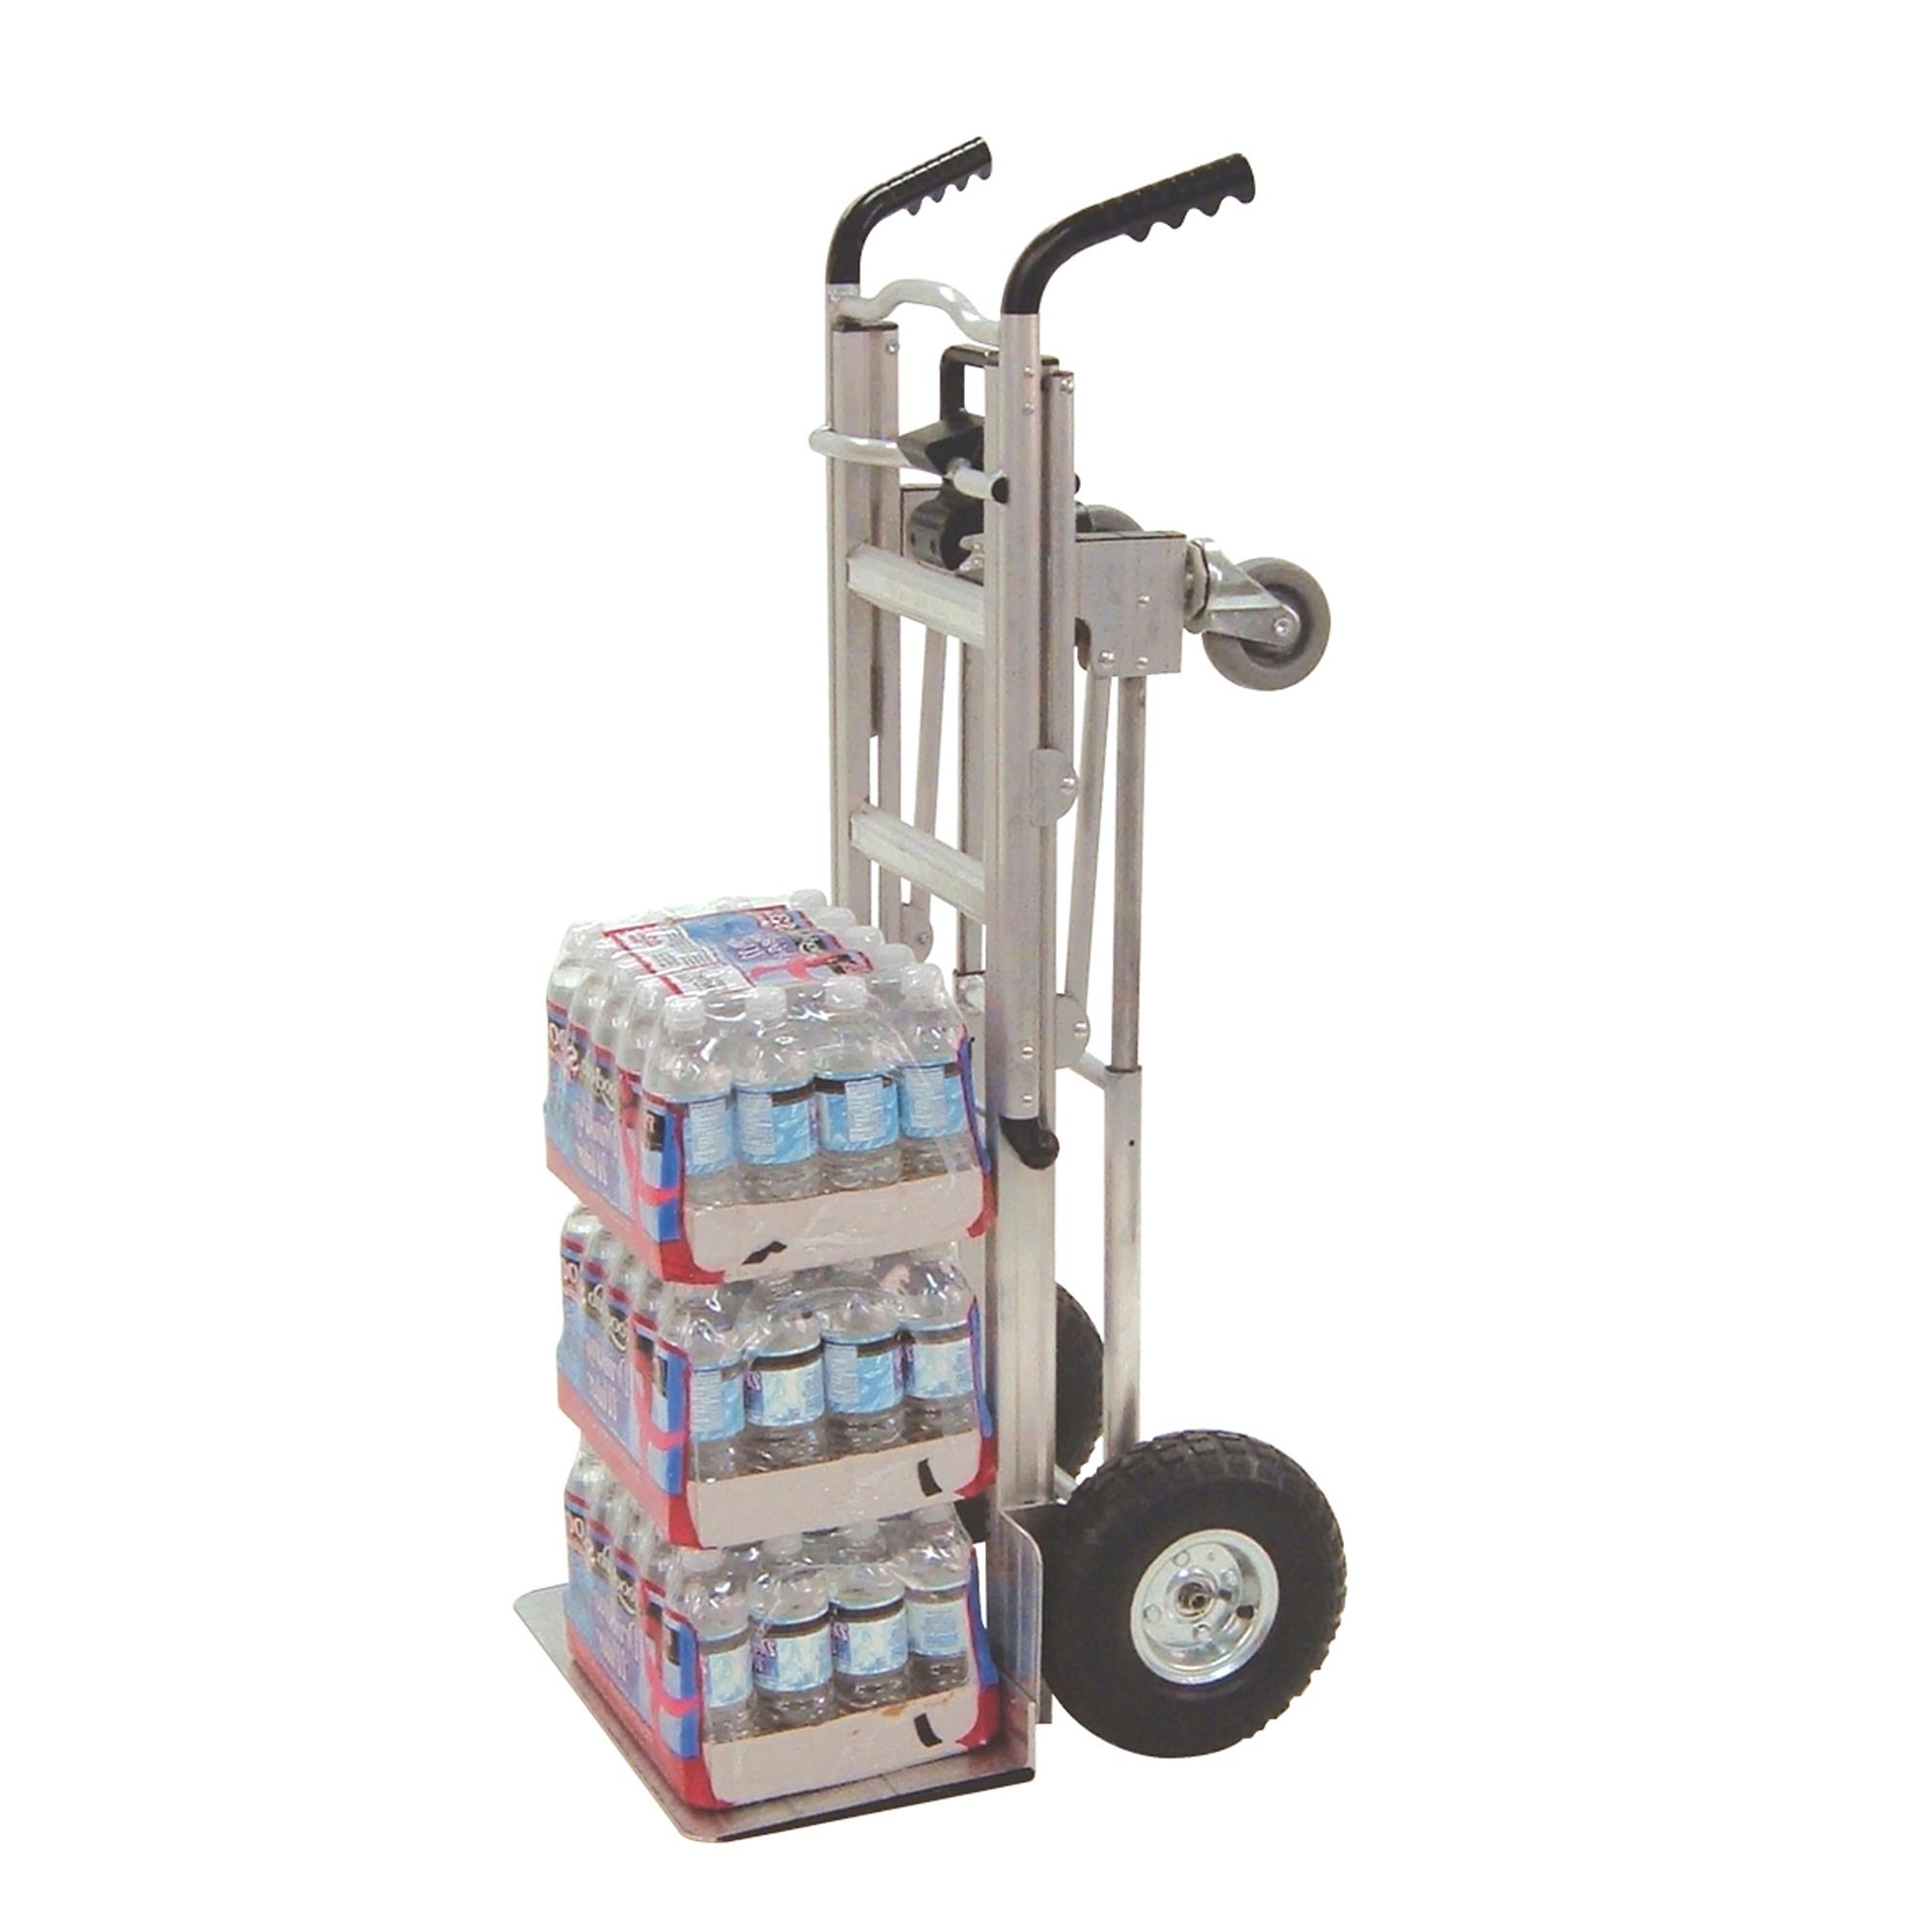 Cosco 3-in-1 Assist Series Aluminum Hand Truck/Assisted Hand Truck/Cart w/ flat free wheels, Silver - image 1 of 16